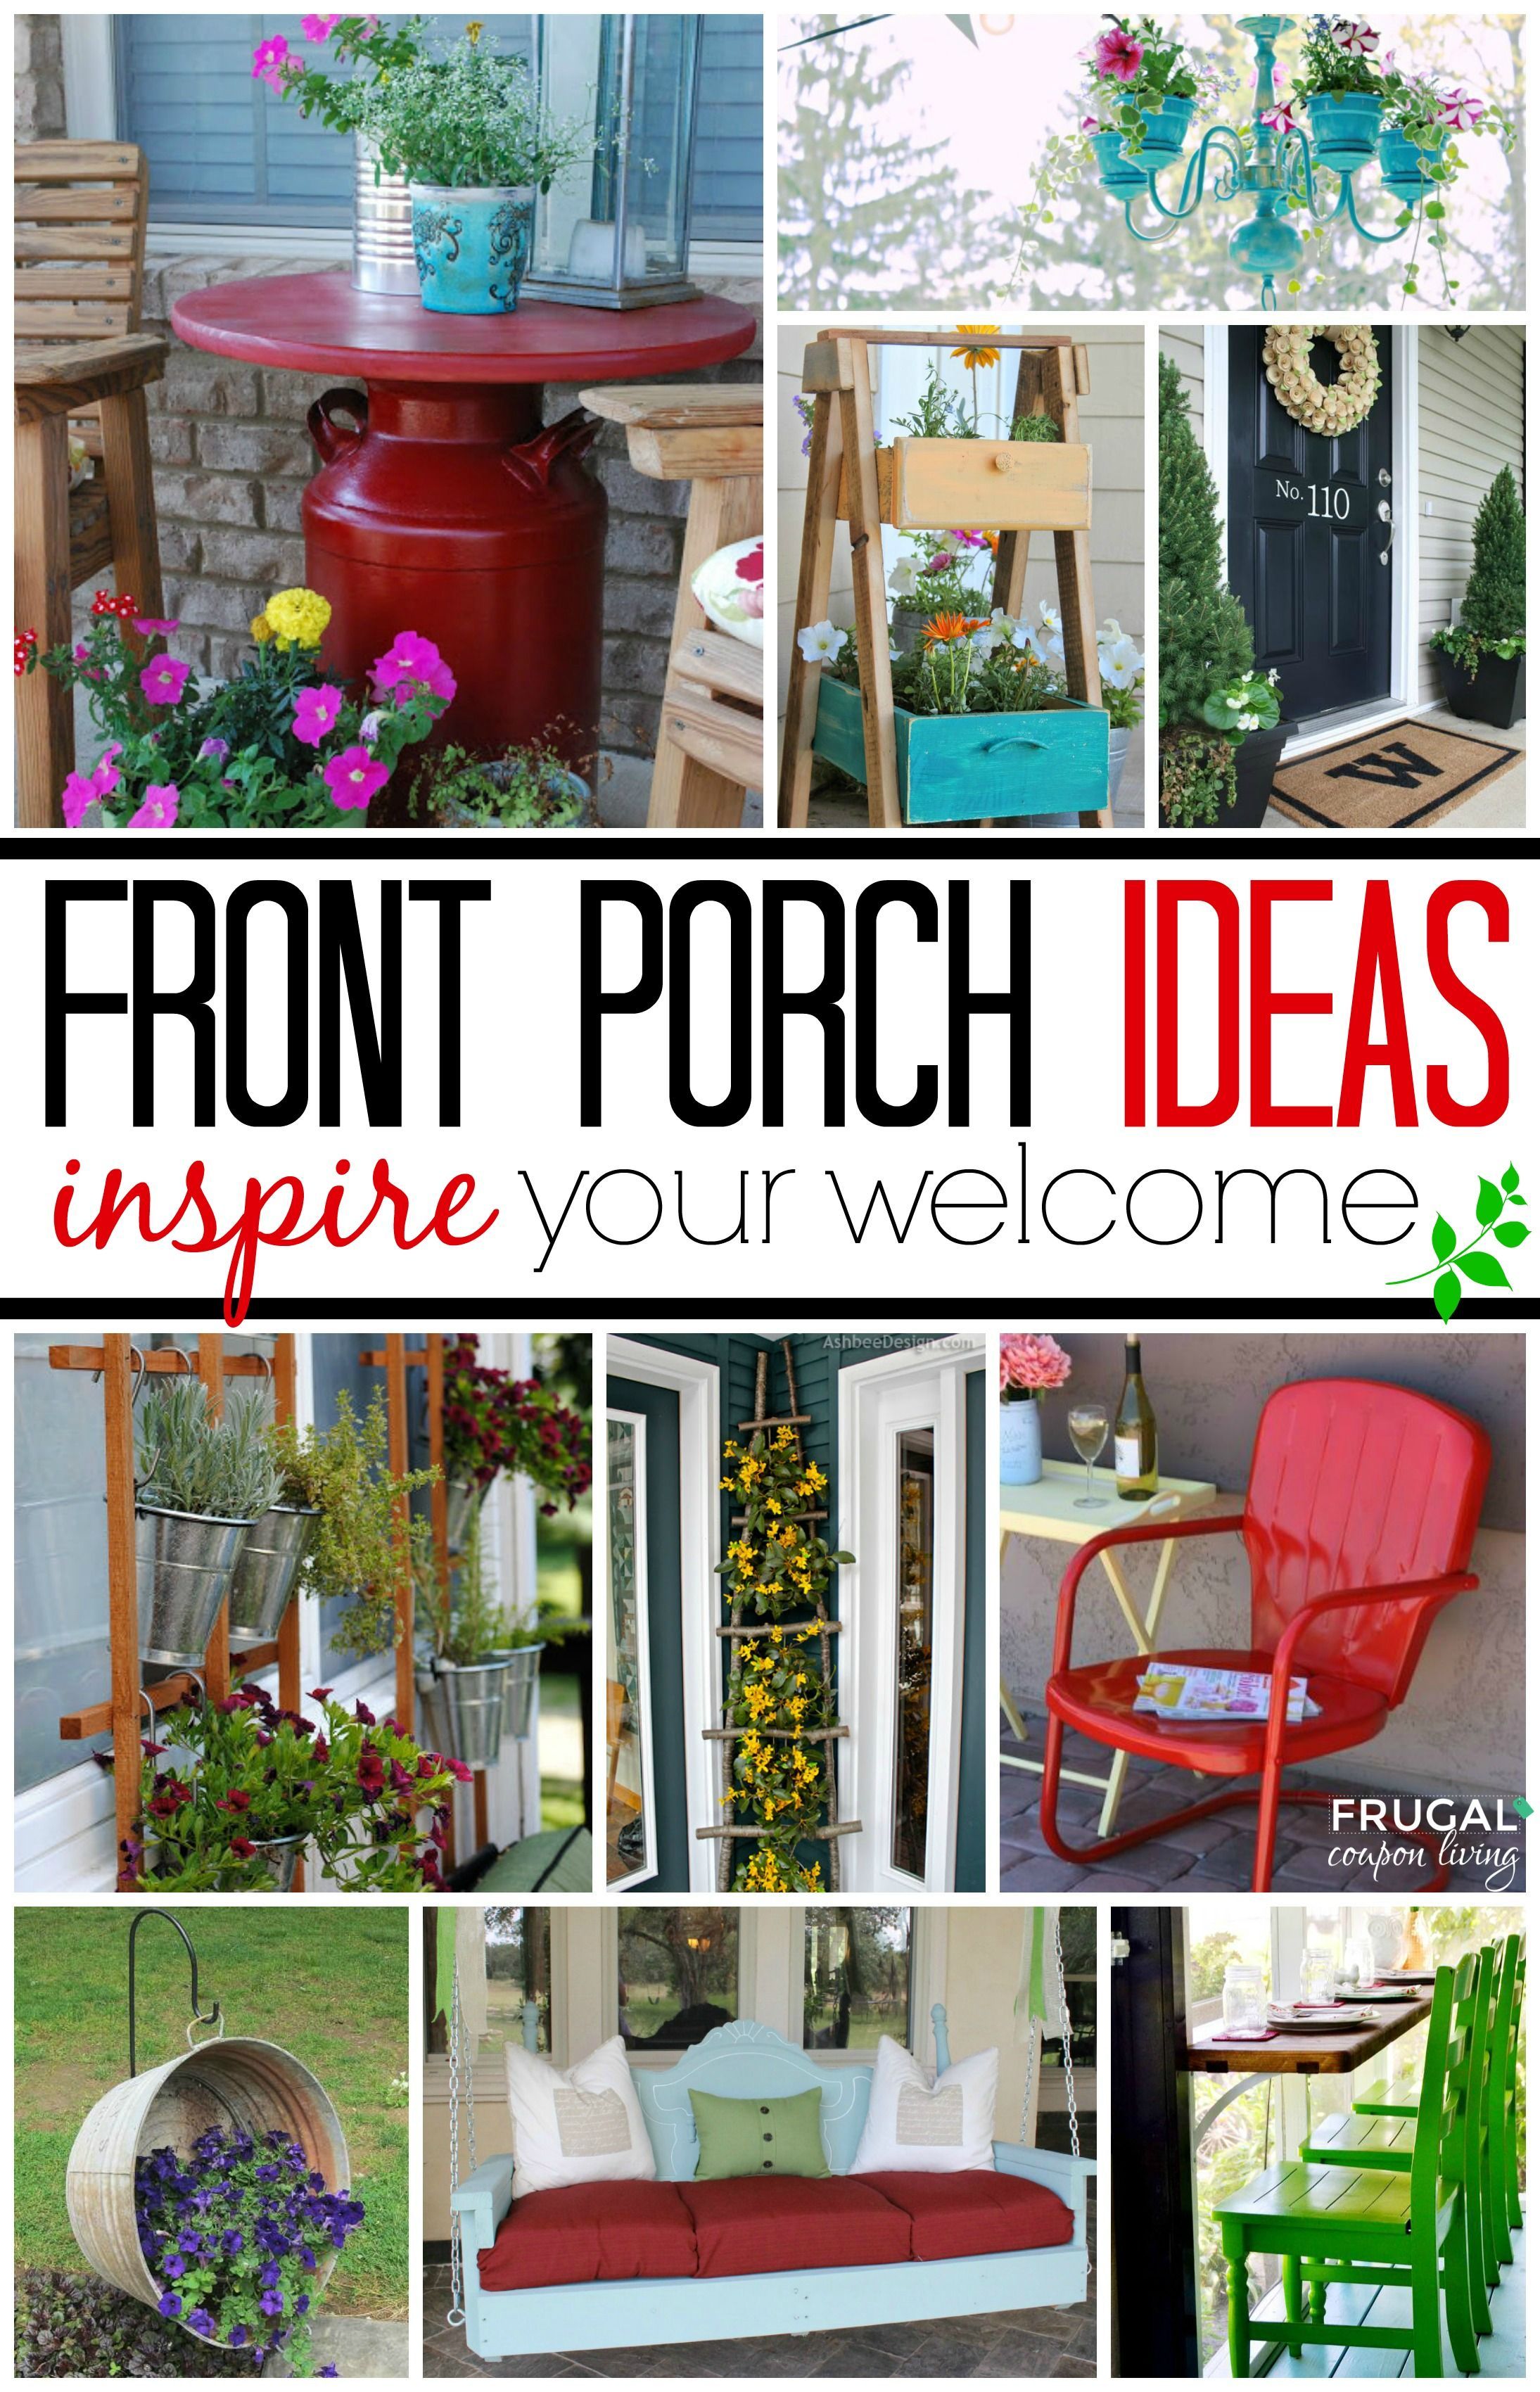 Front Porch Ideas and Landscape Ideas for Your Home – DIY Home Improvement to update your curb appeal. Most of these are budget